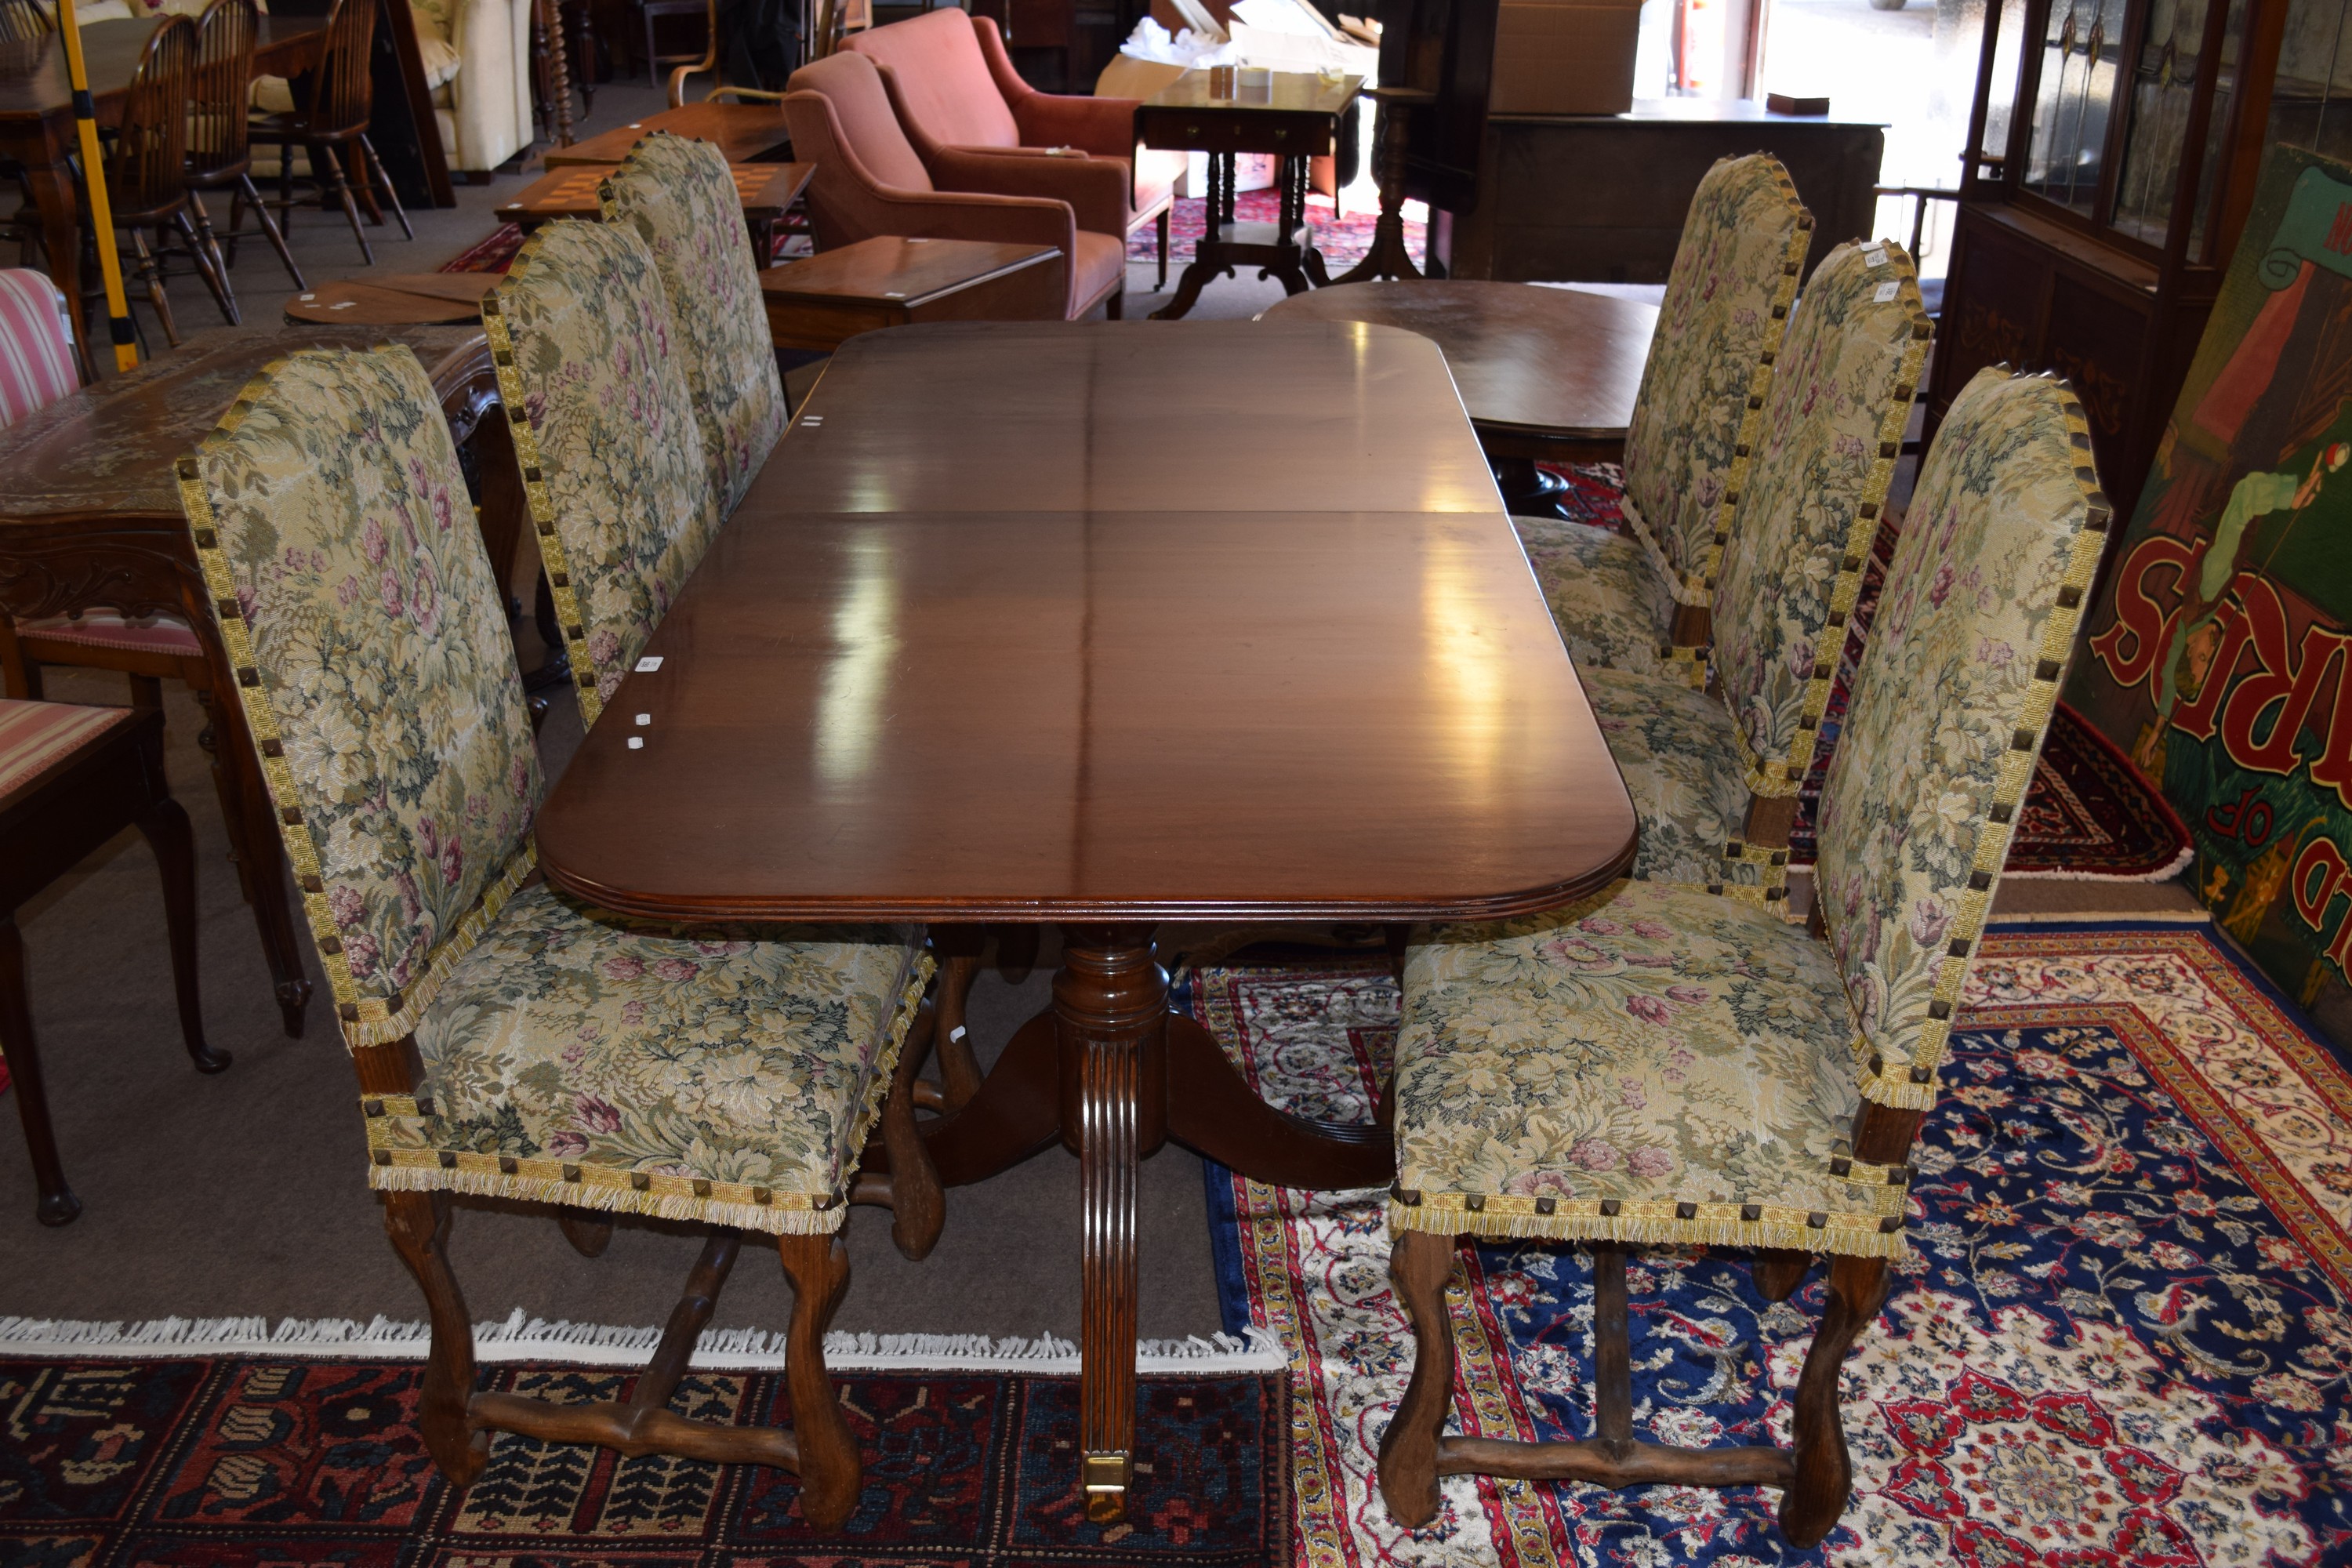 Set of six French style hardwood framed dining chairs, the backs and seats upholstered in floral